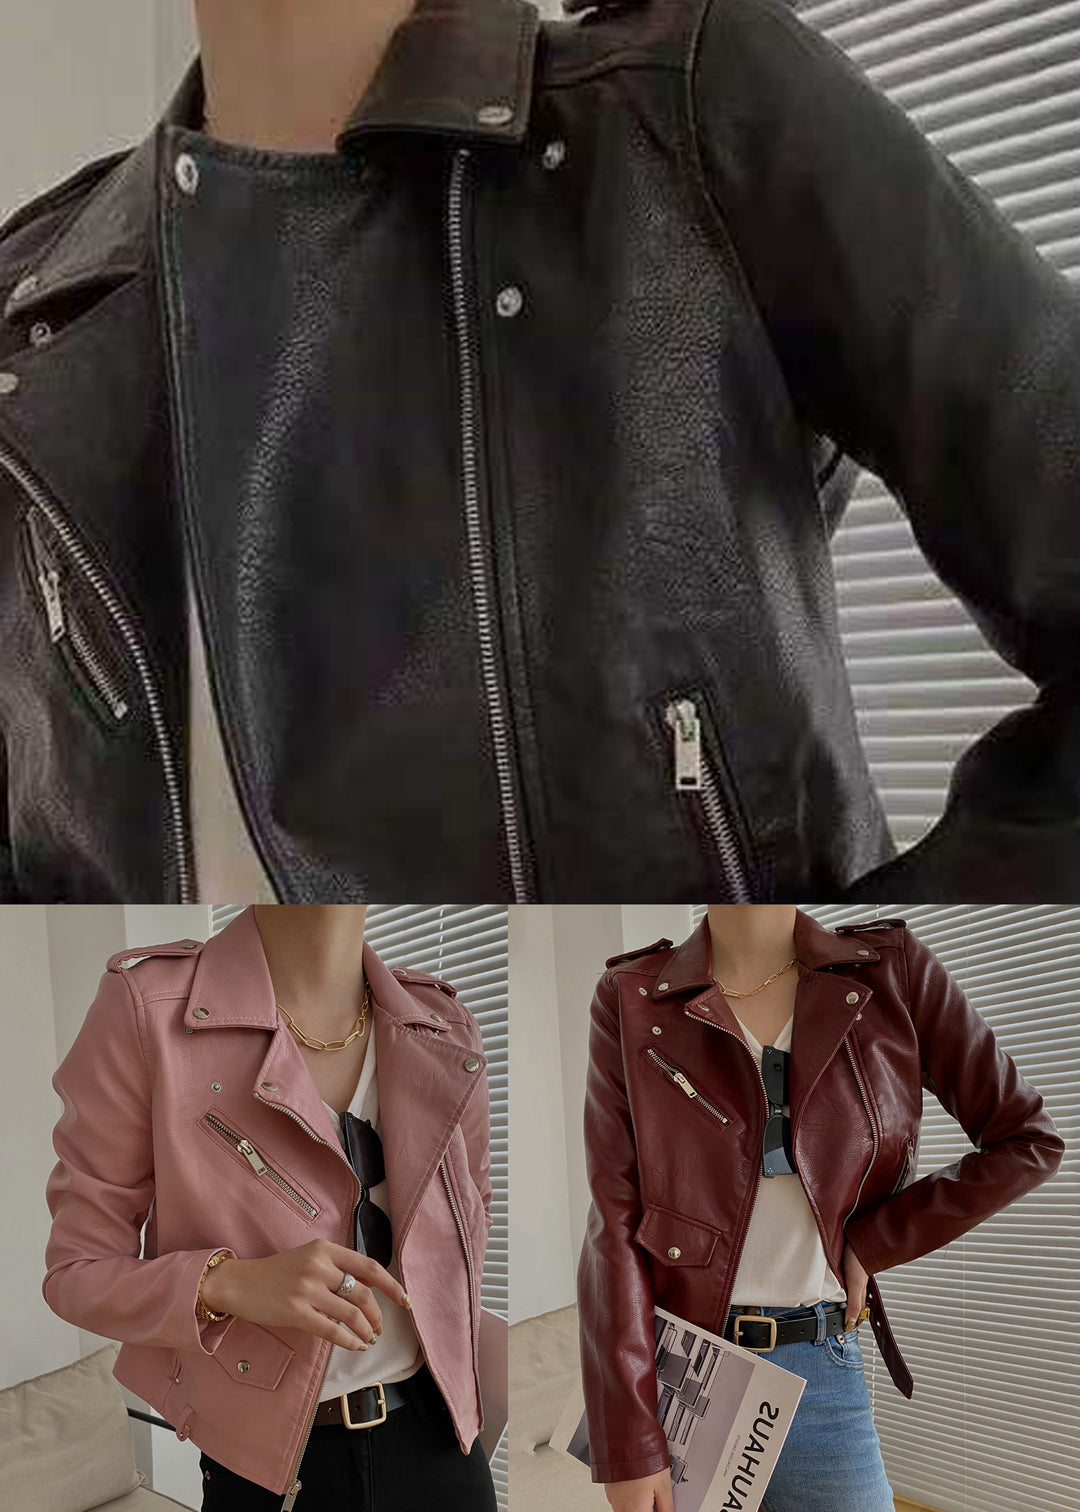 Black Pockets Patchwork Faux Leather Jackets Zip Up Fall